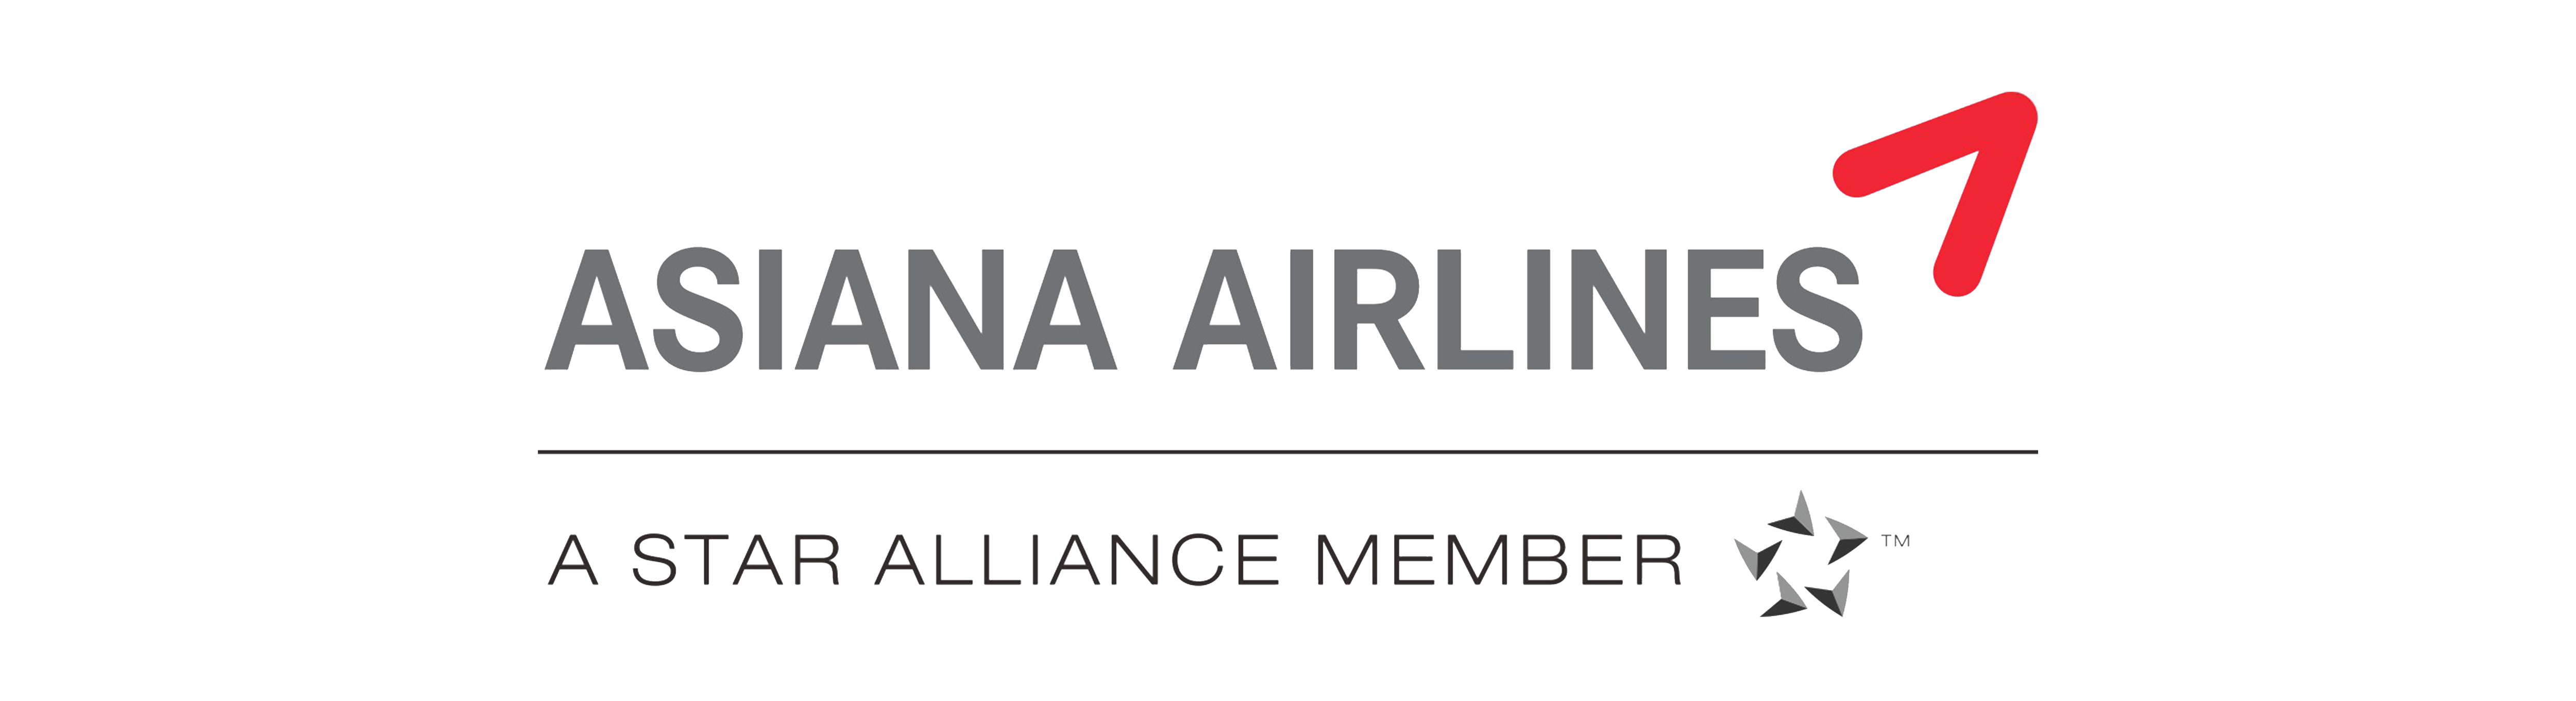 ASIANA AIRLINES Logo